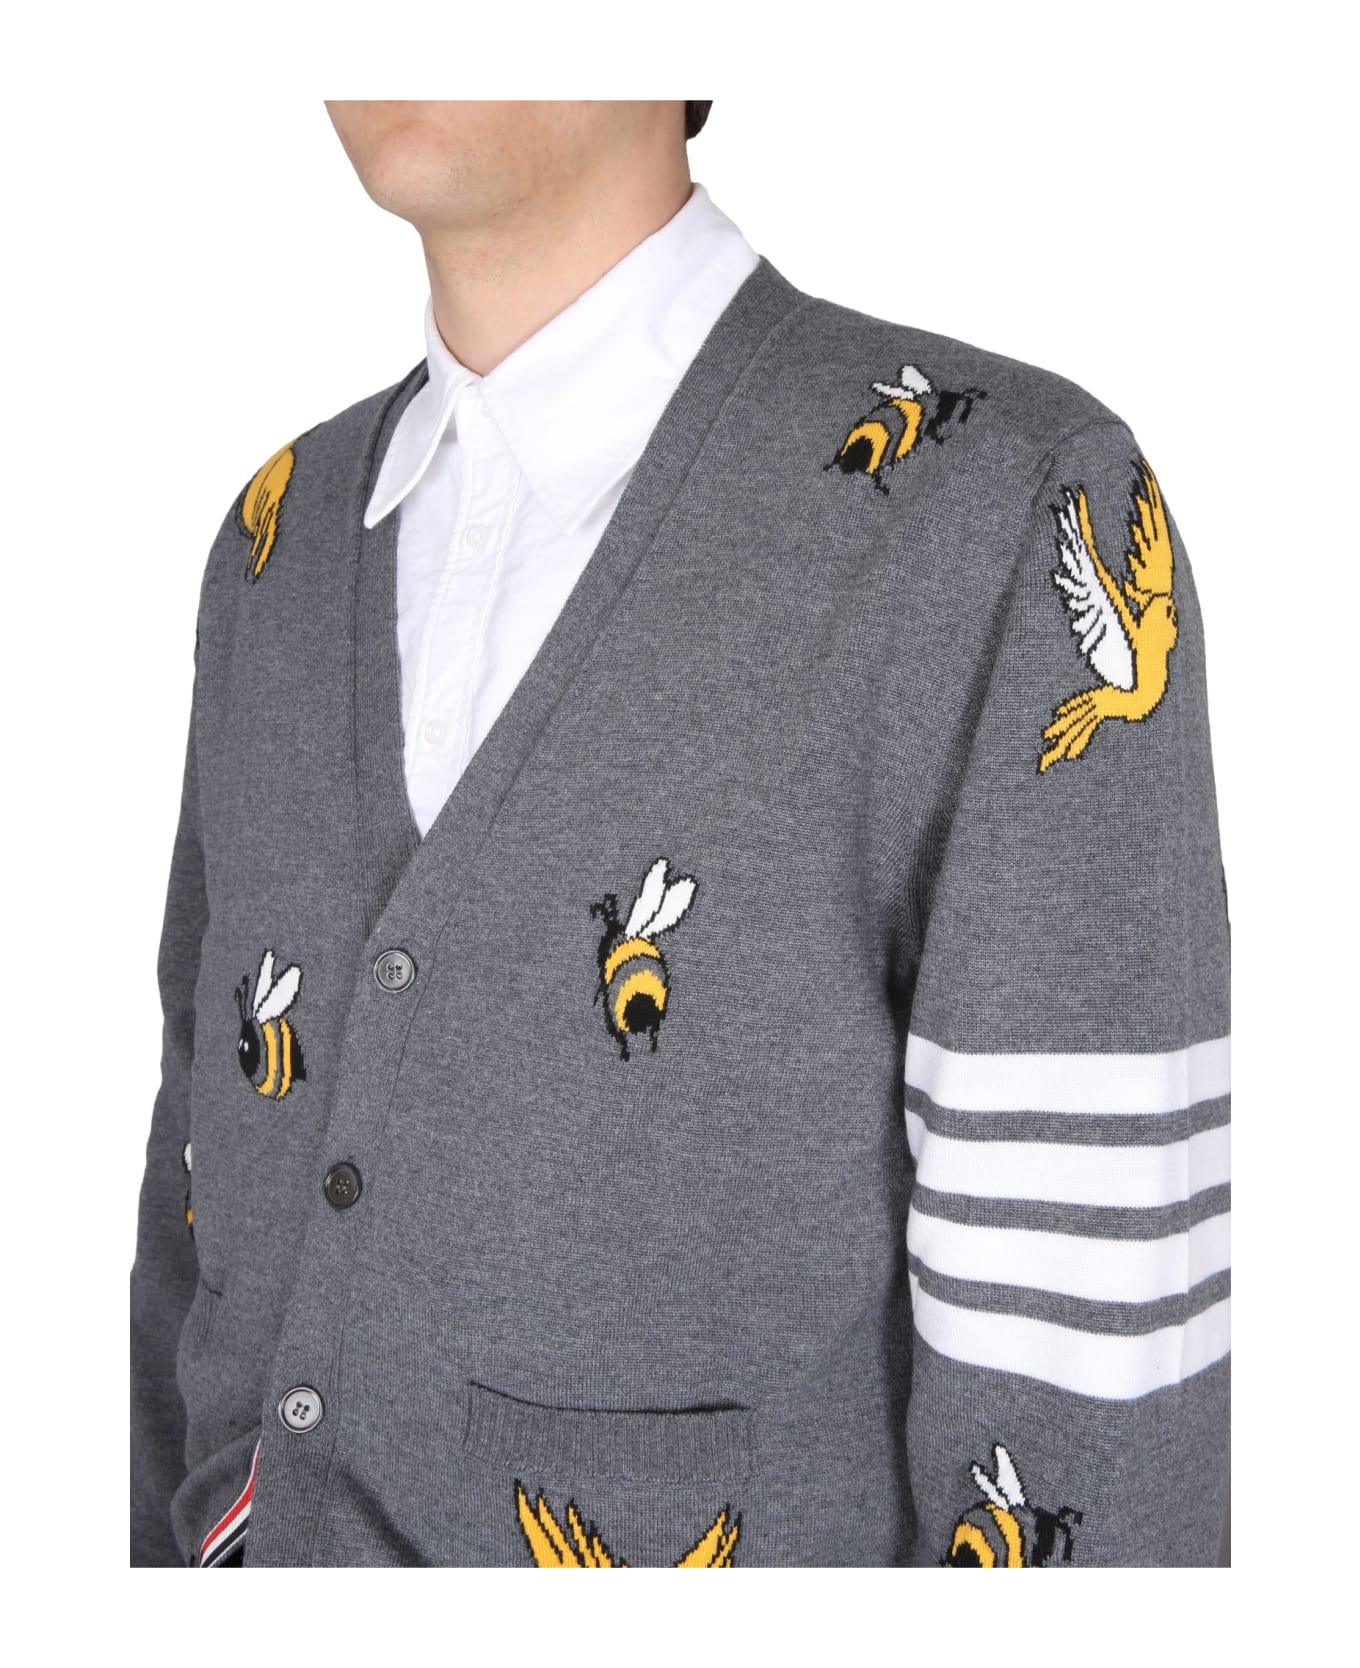 Thom Browne Cardigan With Birds And Bees Inlays - GRIGIO